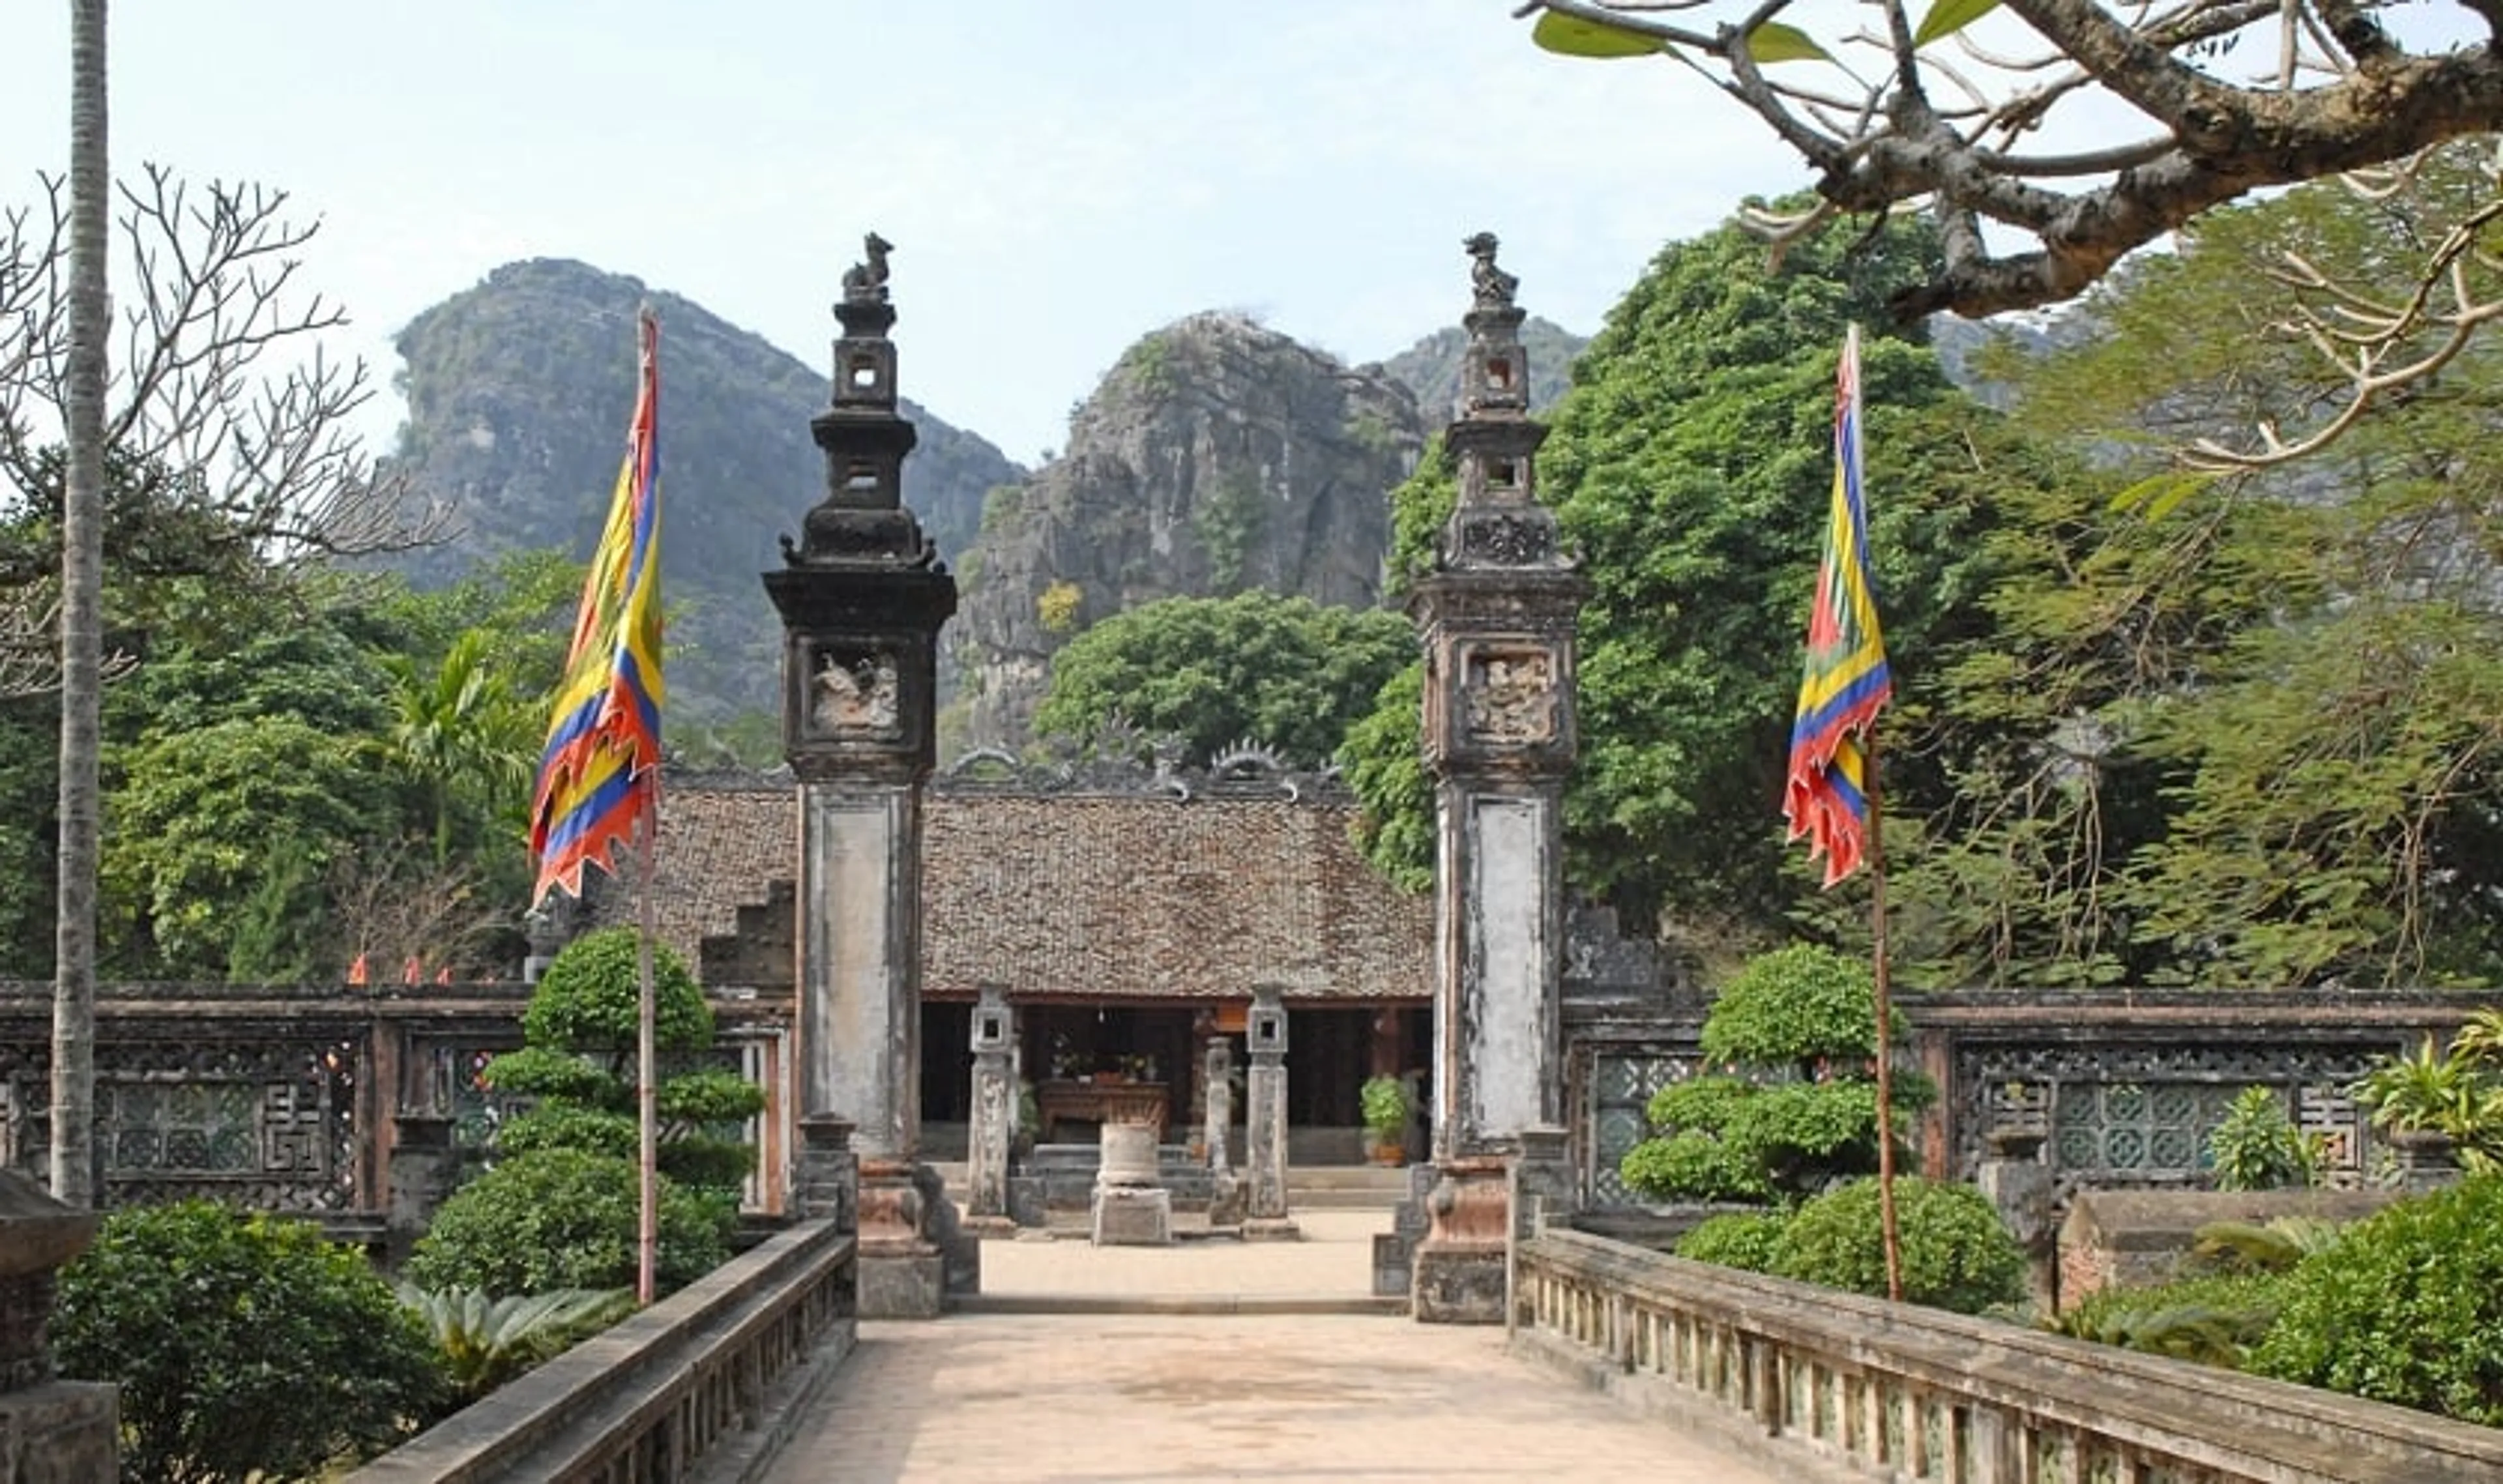 Discover the Dinh and Le Kings' Temples in Hoa Lu, Ninh Binh